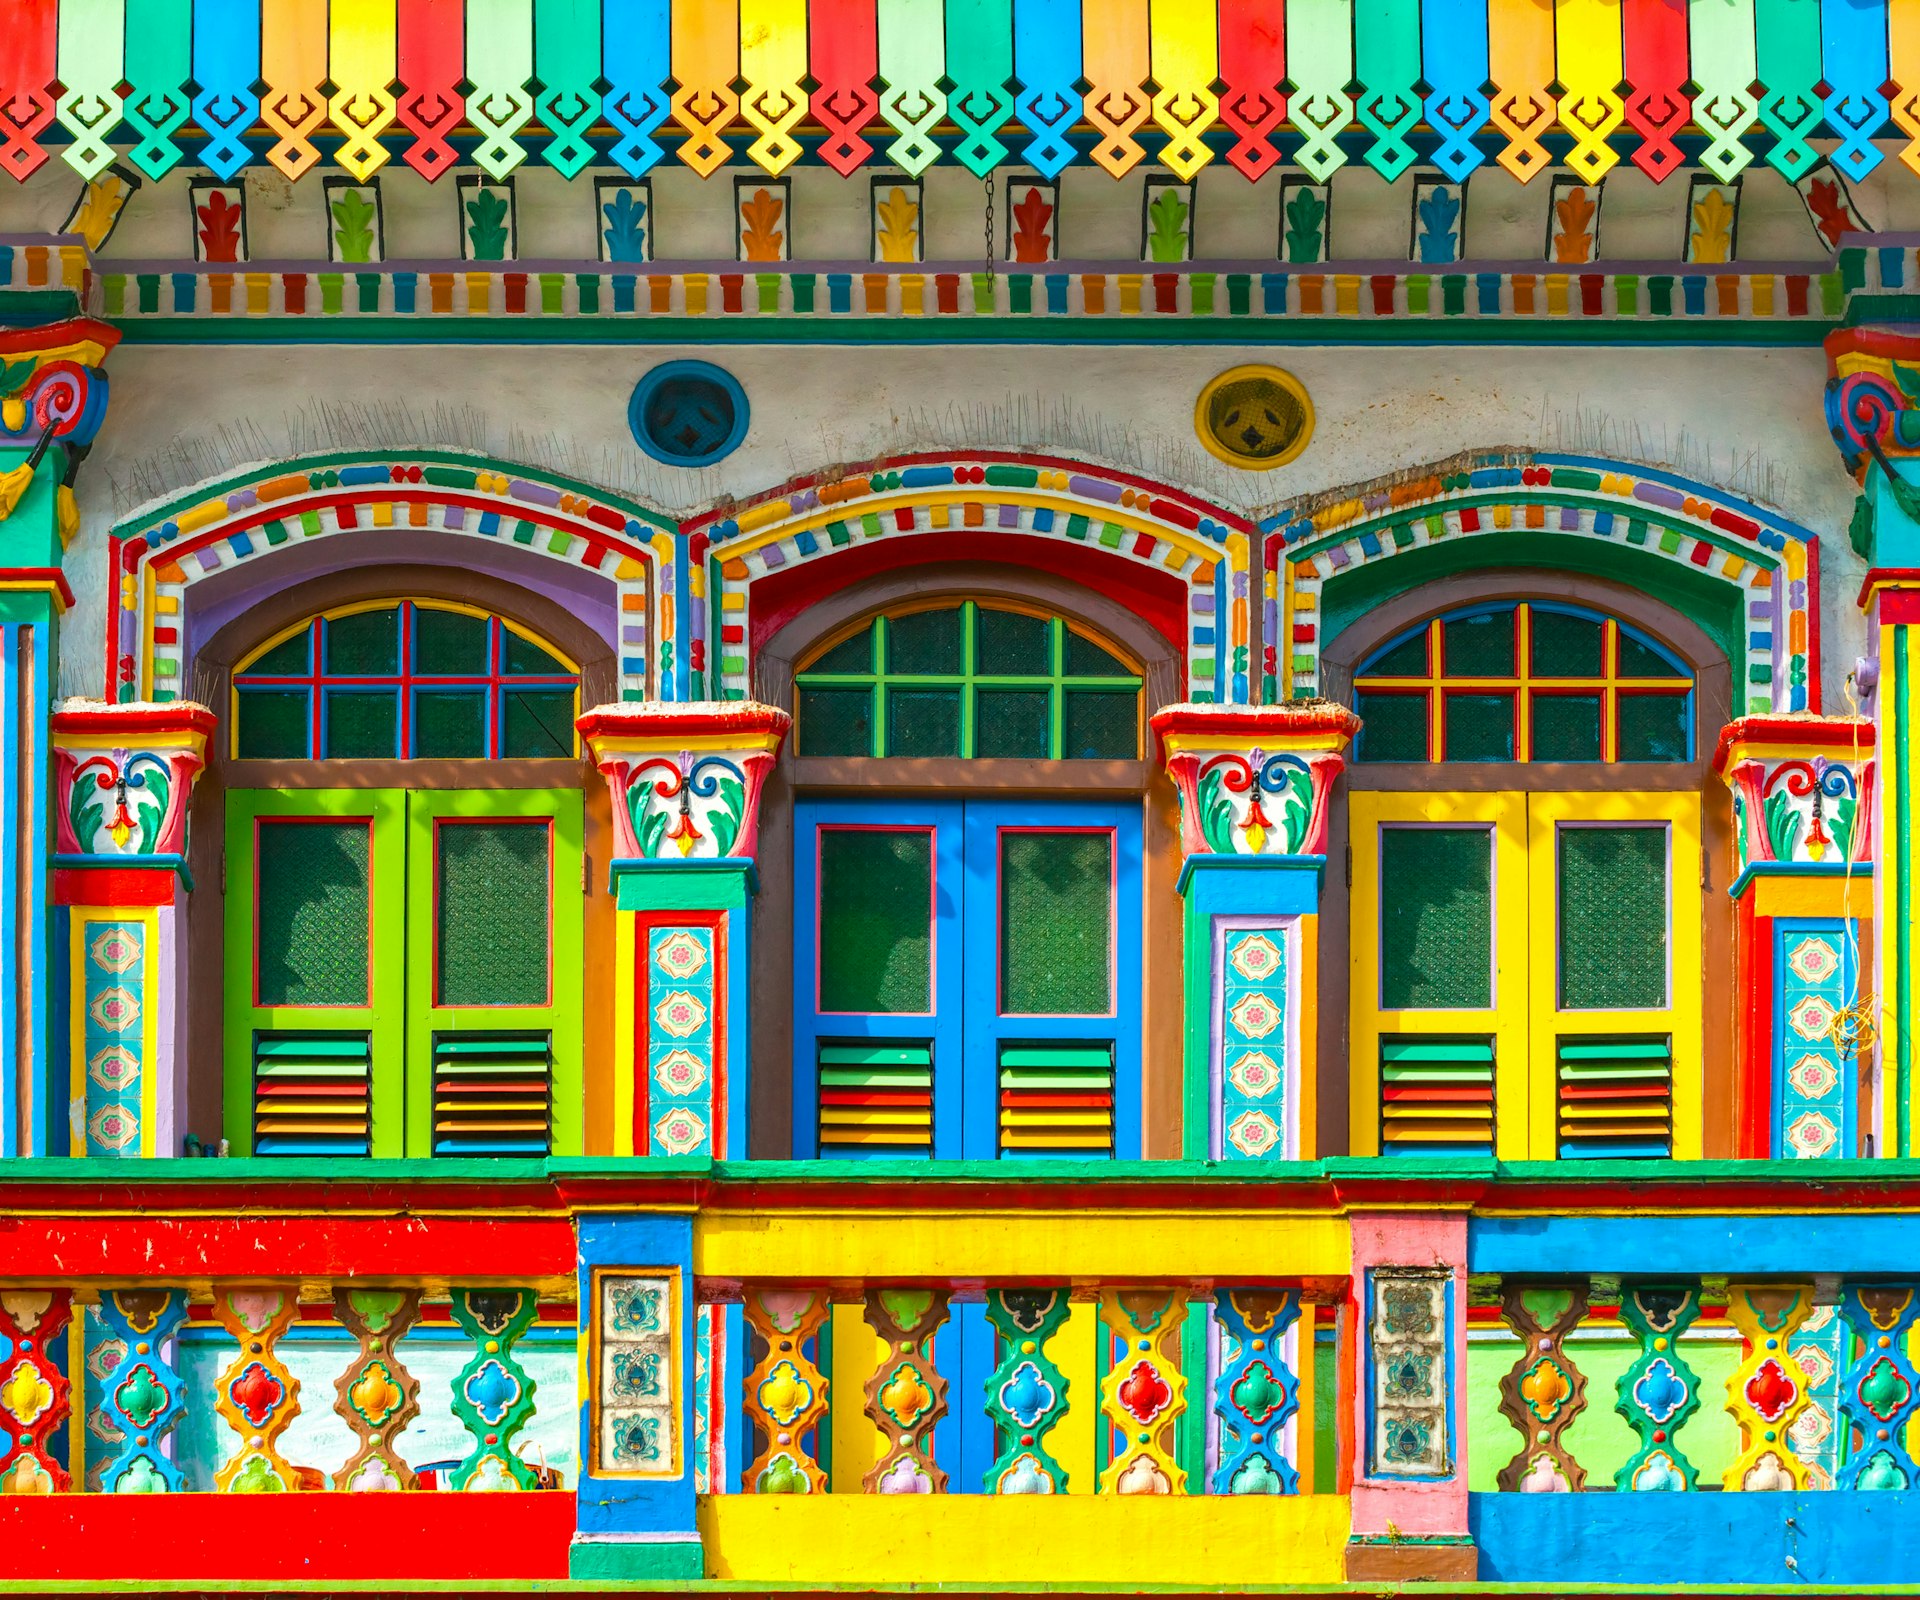 Three colorful Little India shopfronts painted in blues, greens, yellows and reds in Singapore 